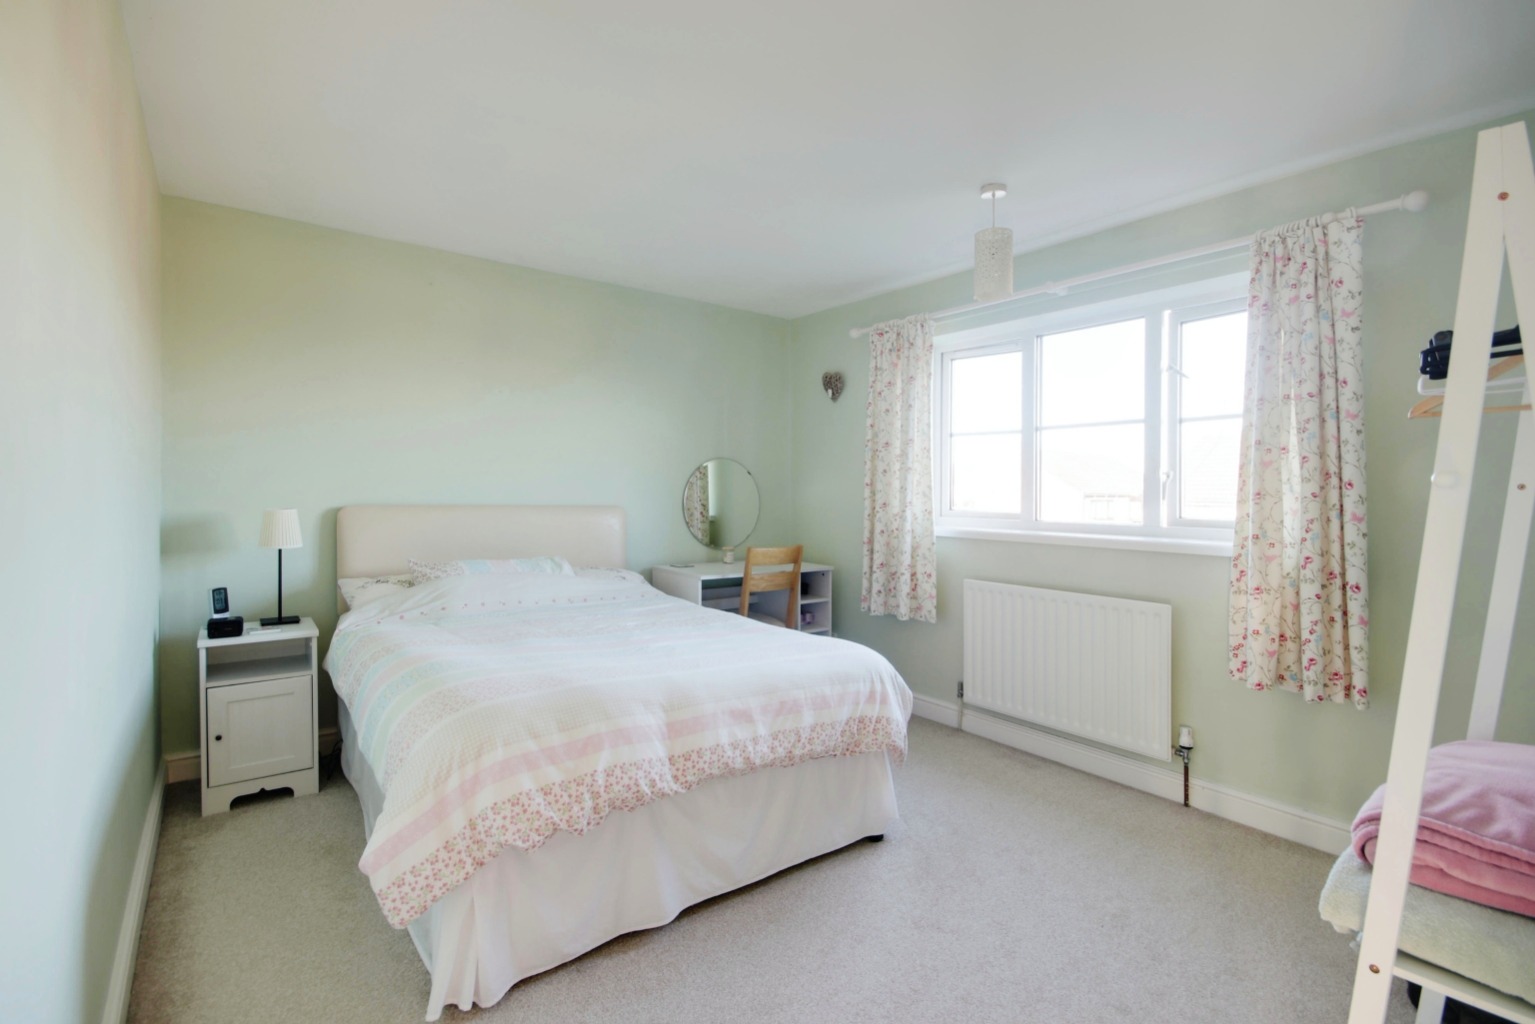 4 bed detached house for sale in Hessle View, Barton upon Humber  - Property Image 14